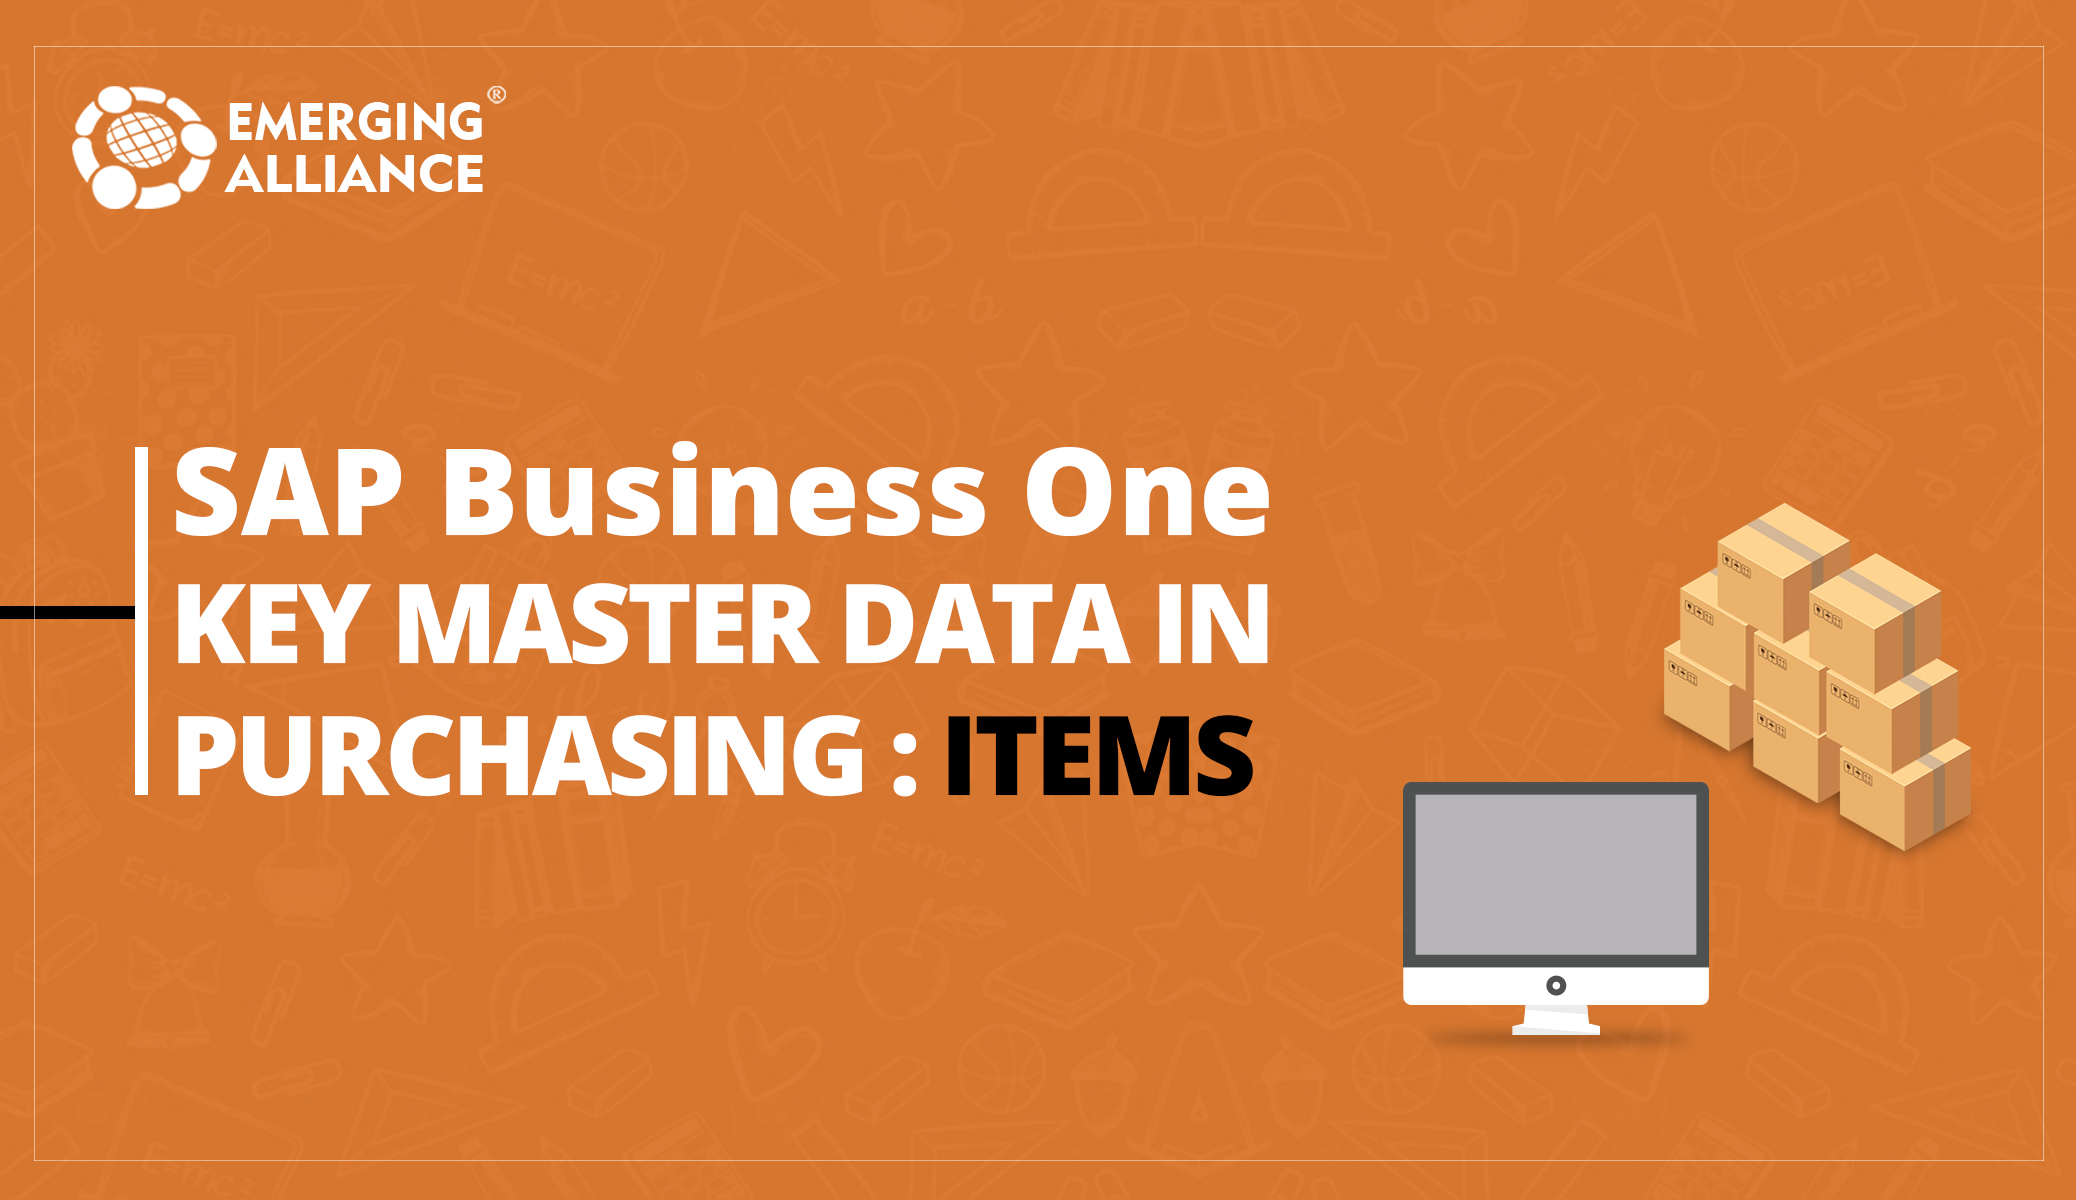 key master data in purchasing - SAP Business One